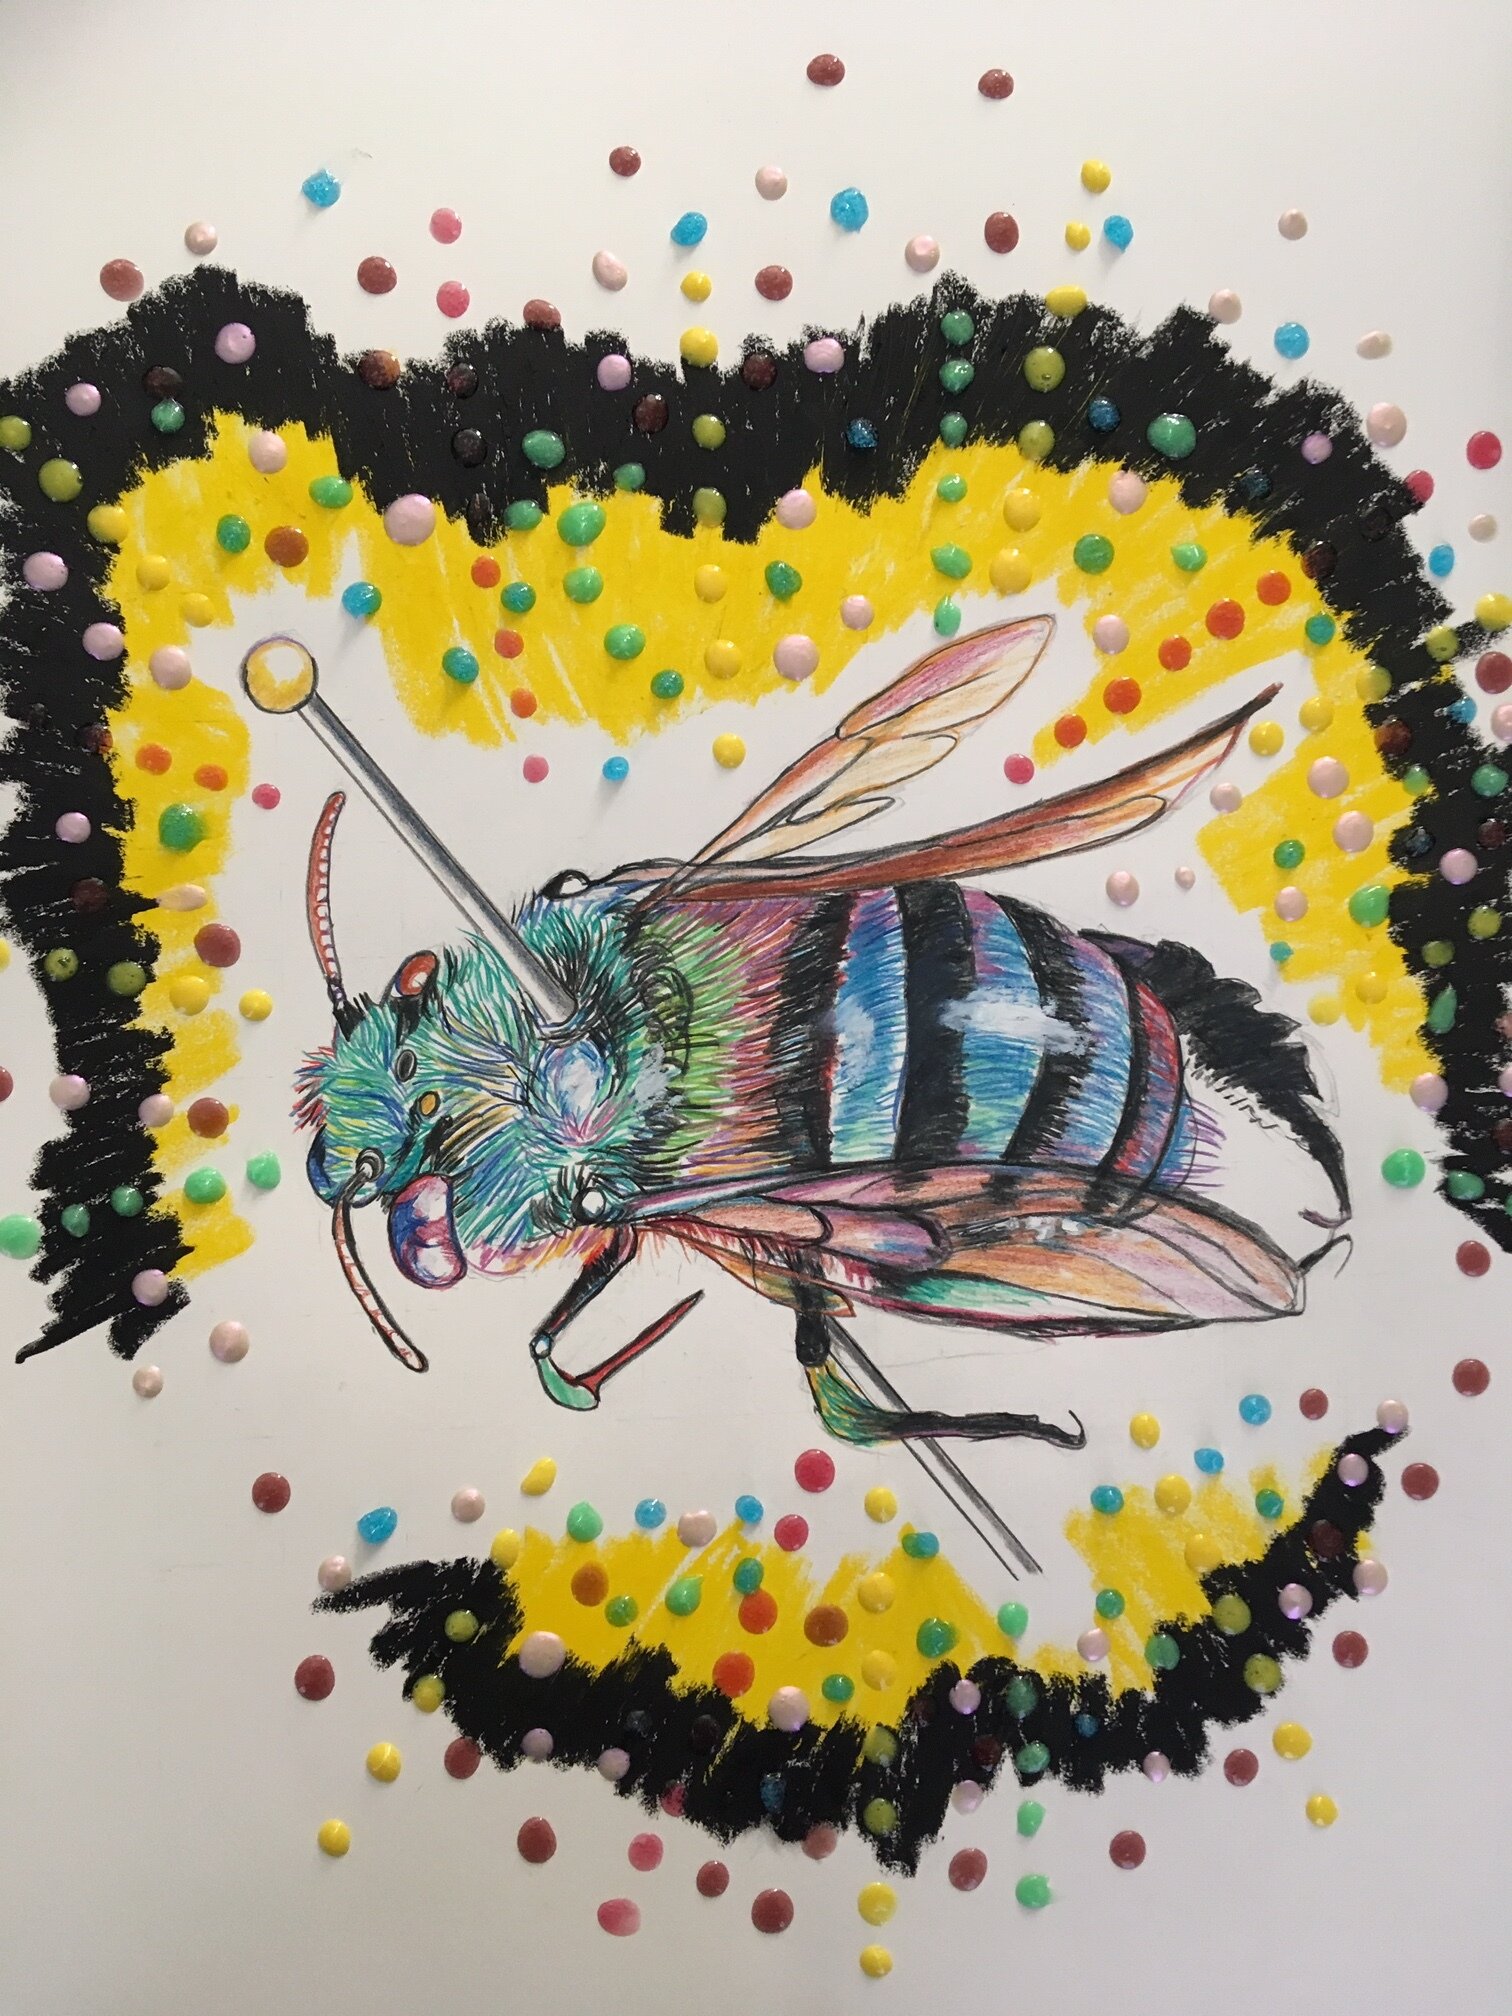   Green Bee  2020 colored pencil and mixed media on Arches paper 24” x 18” 